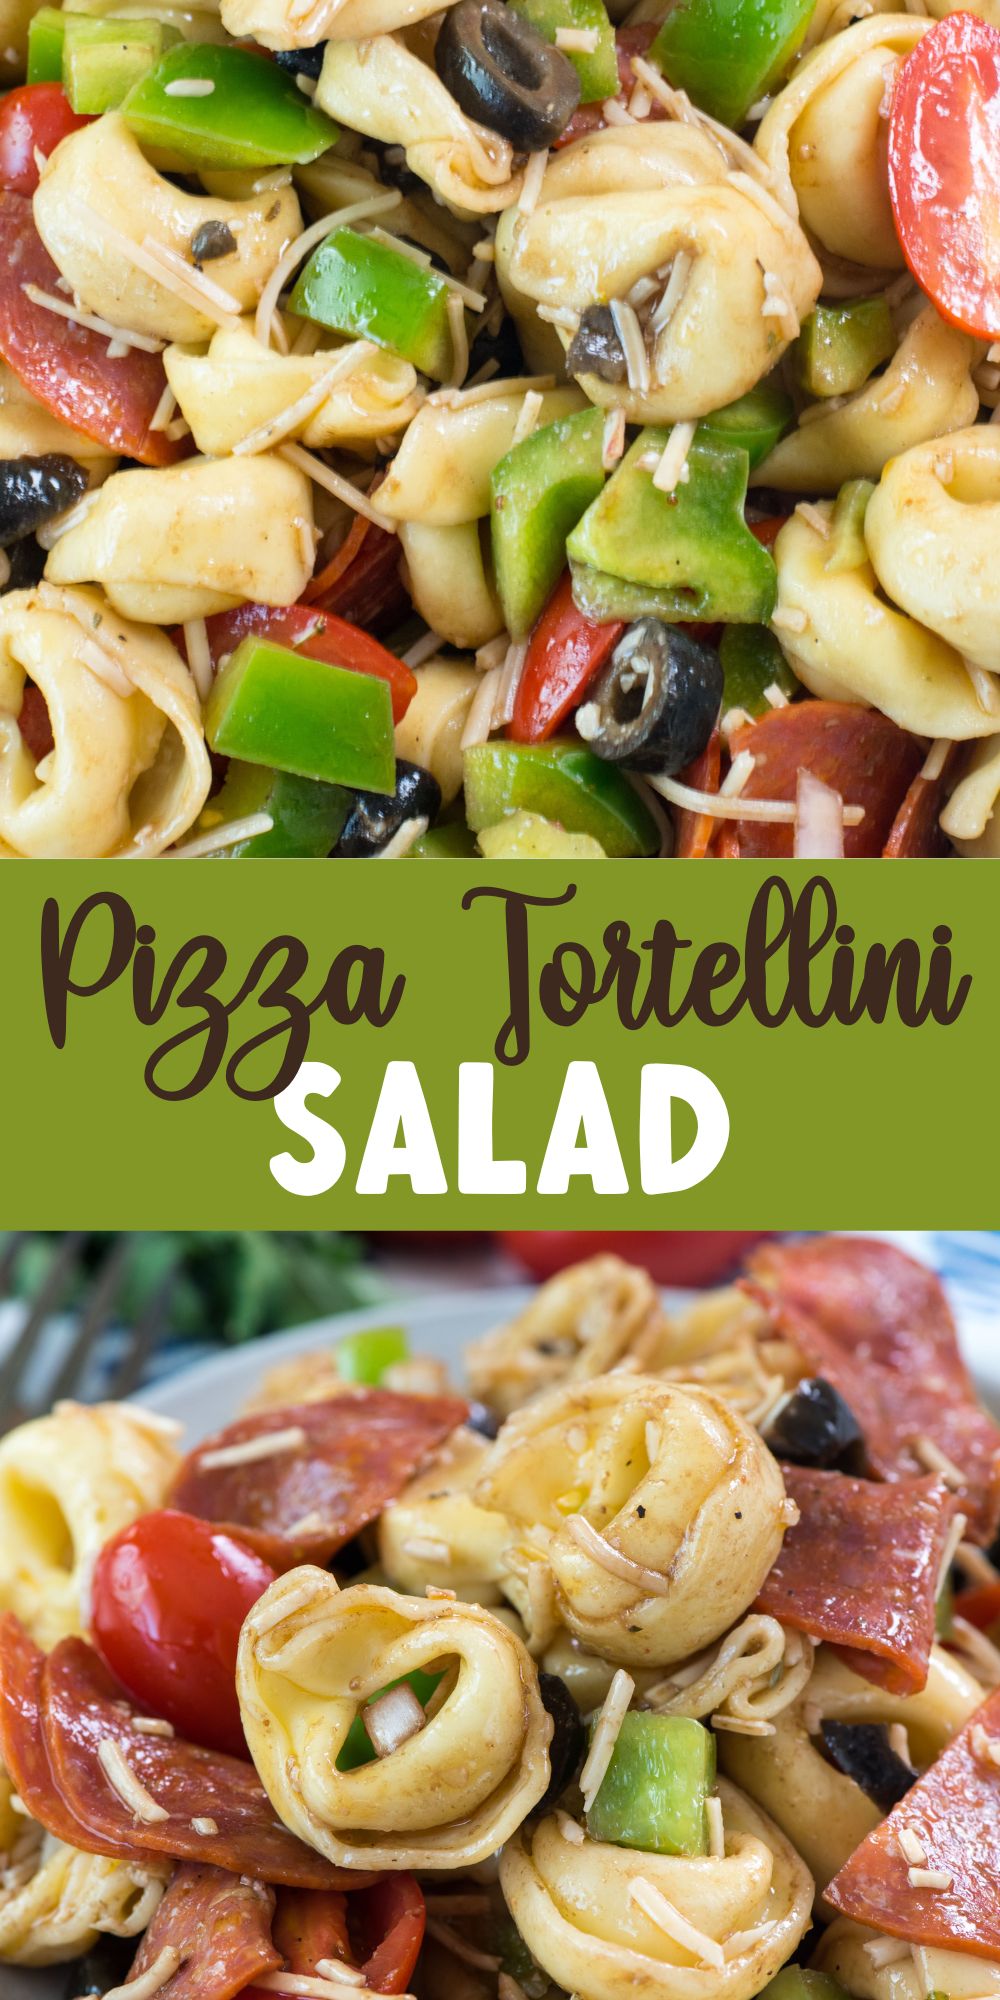 two photos of the salad with tortellini and tomatoes and pepperoni and peppers mixed